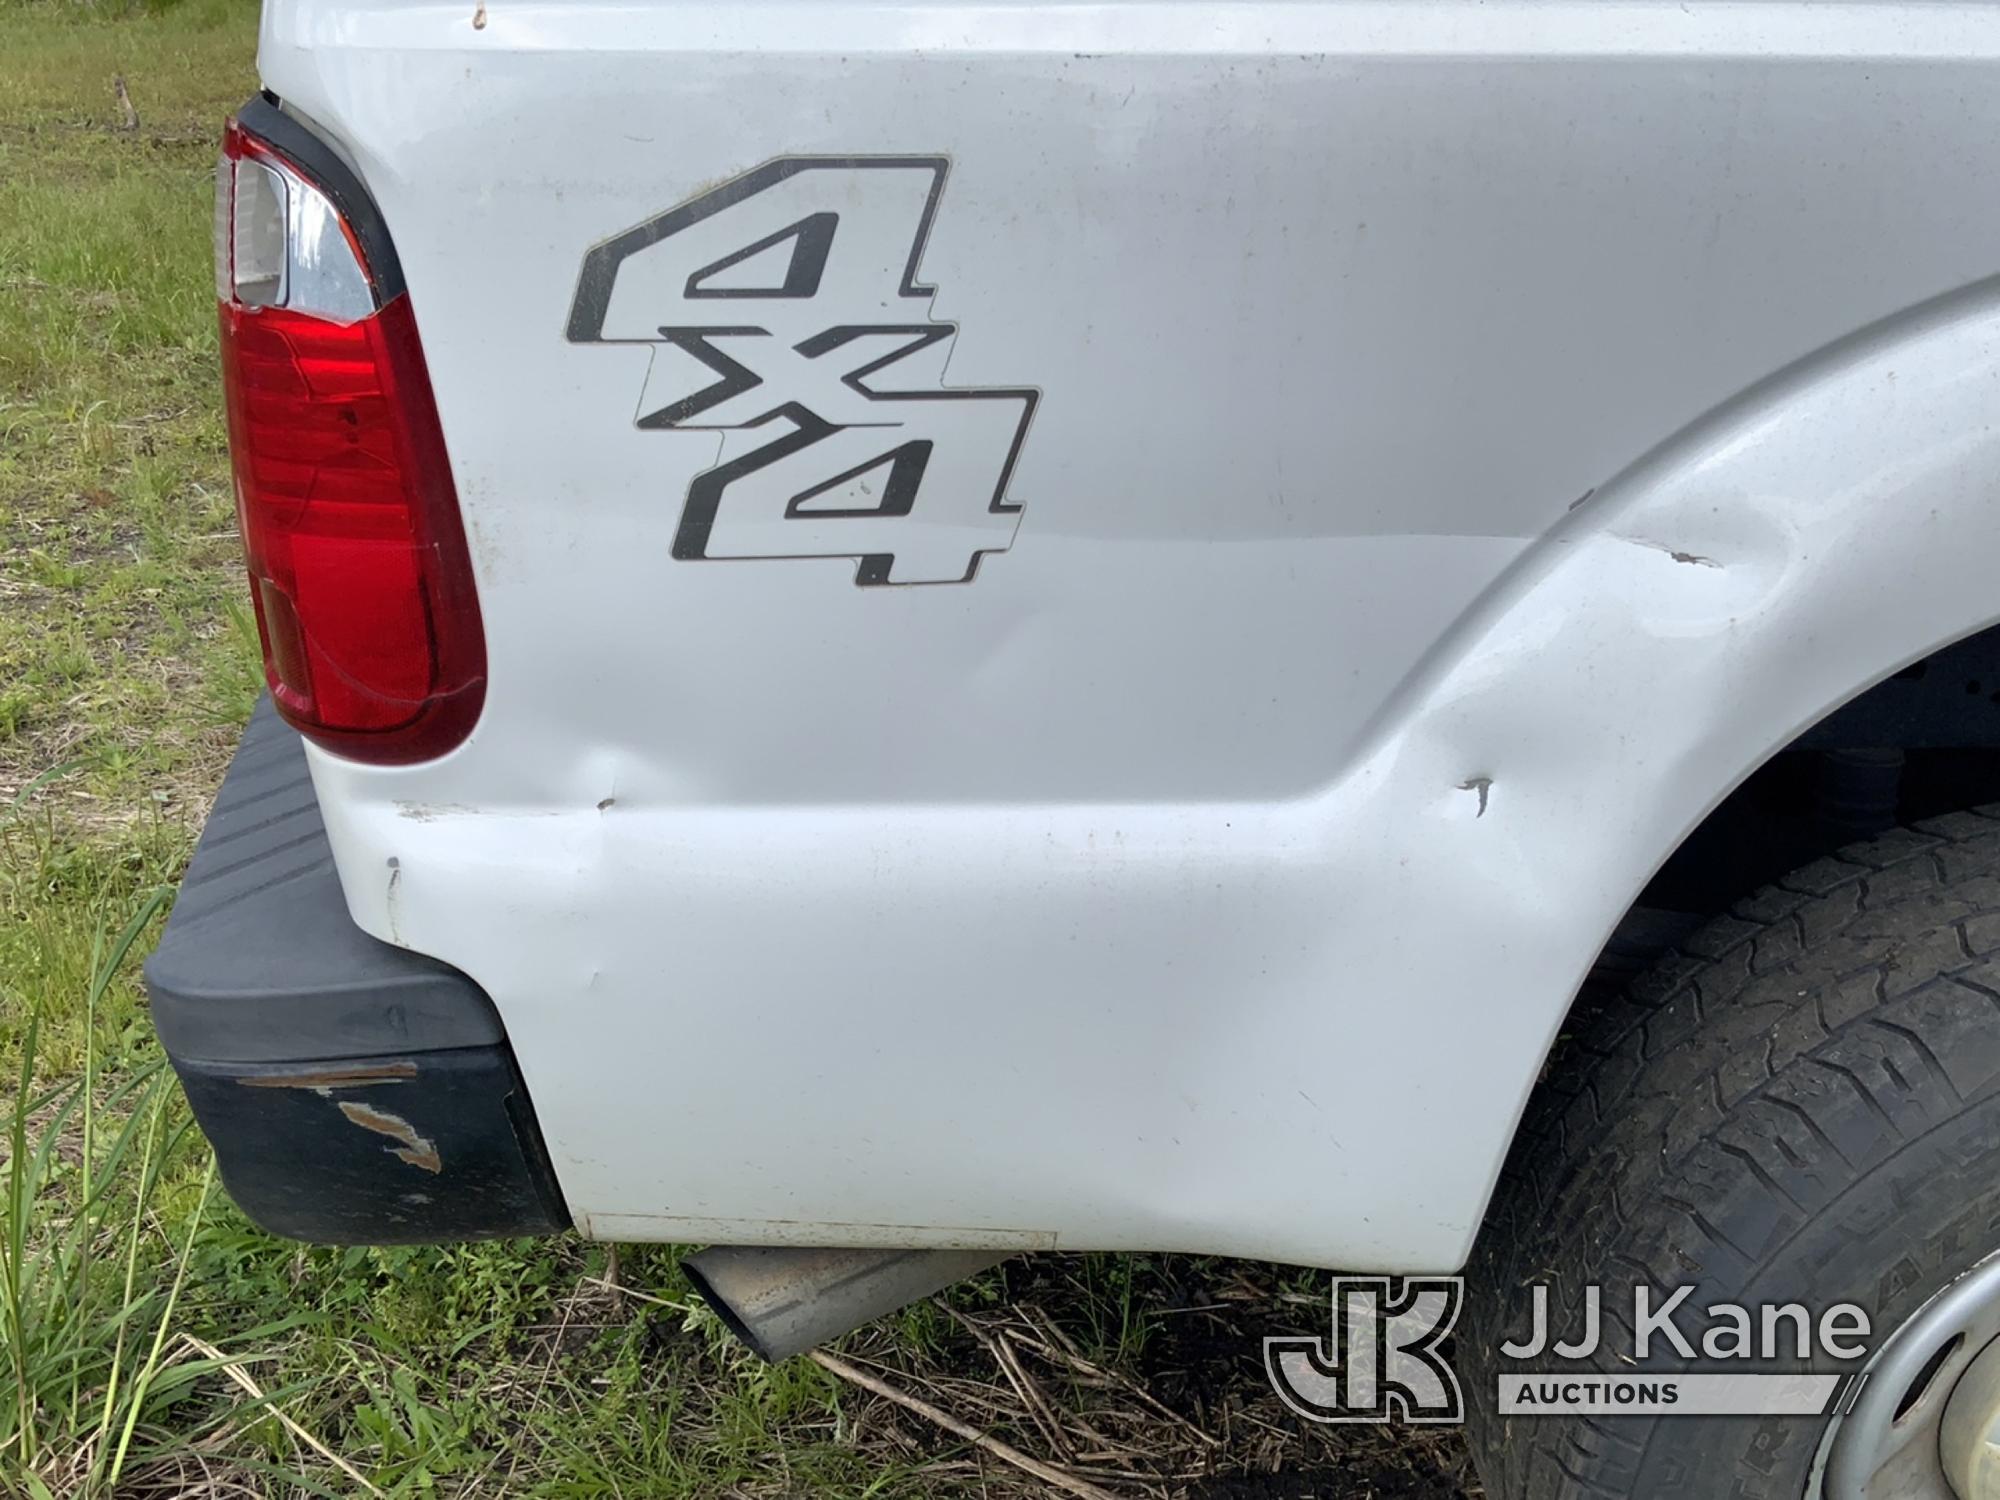 (Ridgeland, SC) 2013 Ford F250 4x4 Extended-Cab Pickup Truck Runs Rough, Moves, Shuts Off